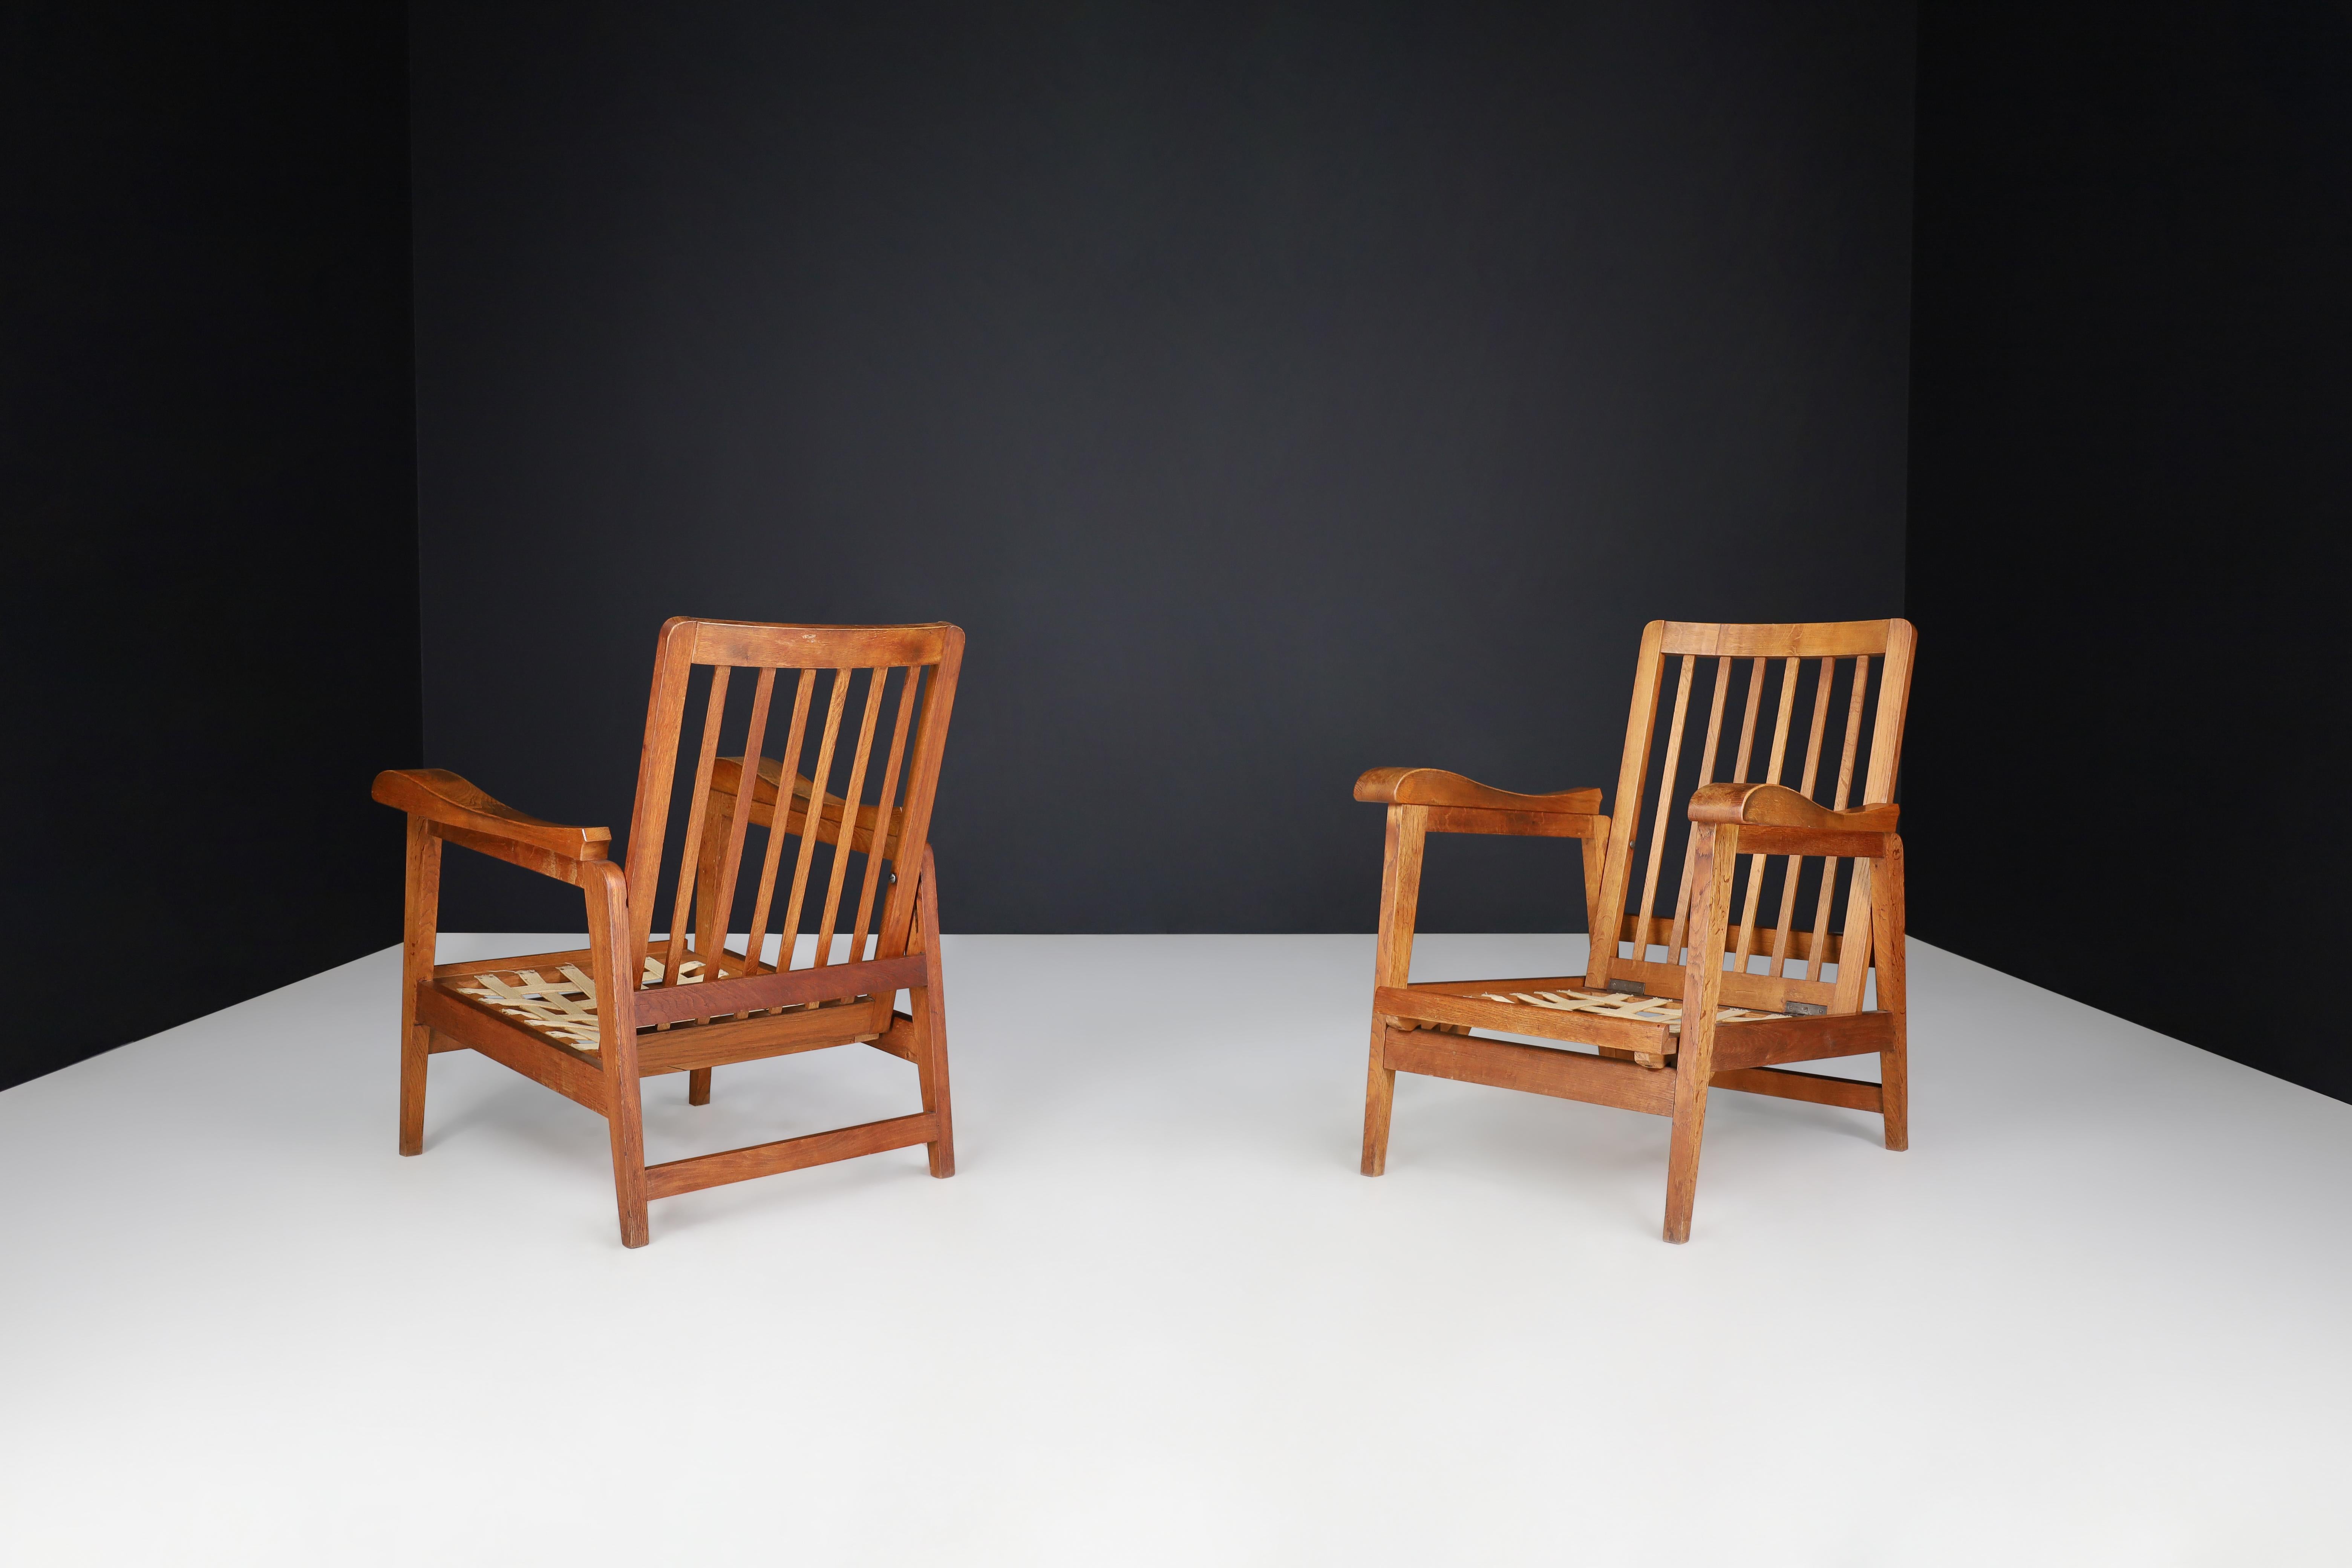 French Brutalist Sculptural Adjustable Lounge Chairs in Oak set of 2 , France, 1950s For Sale